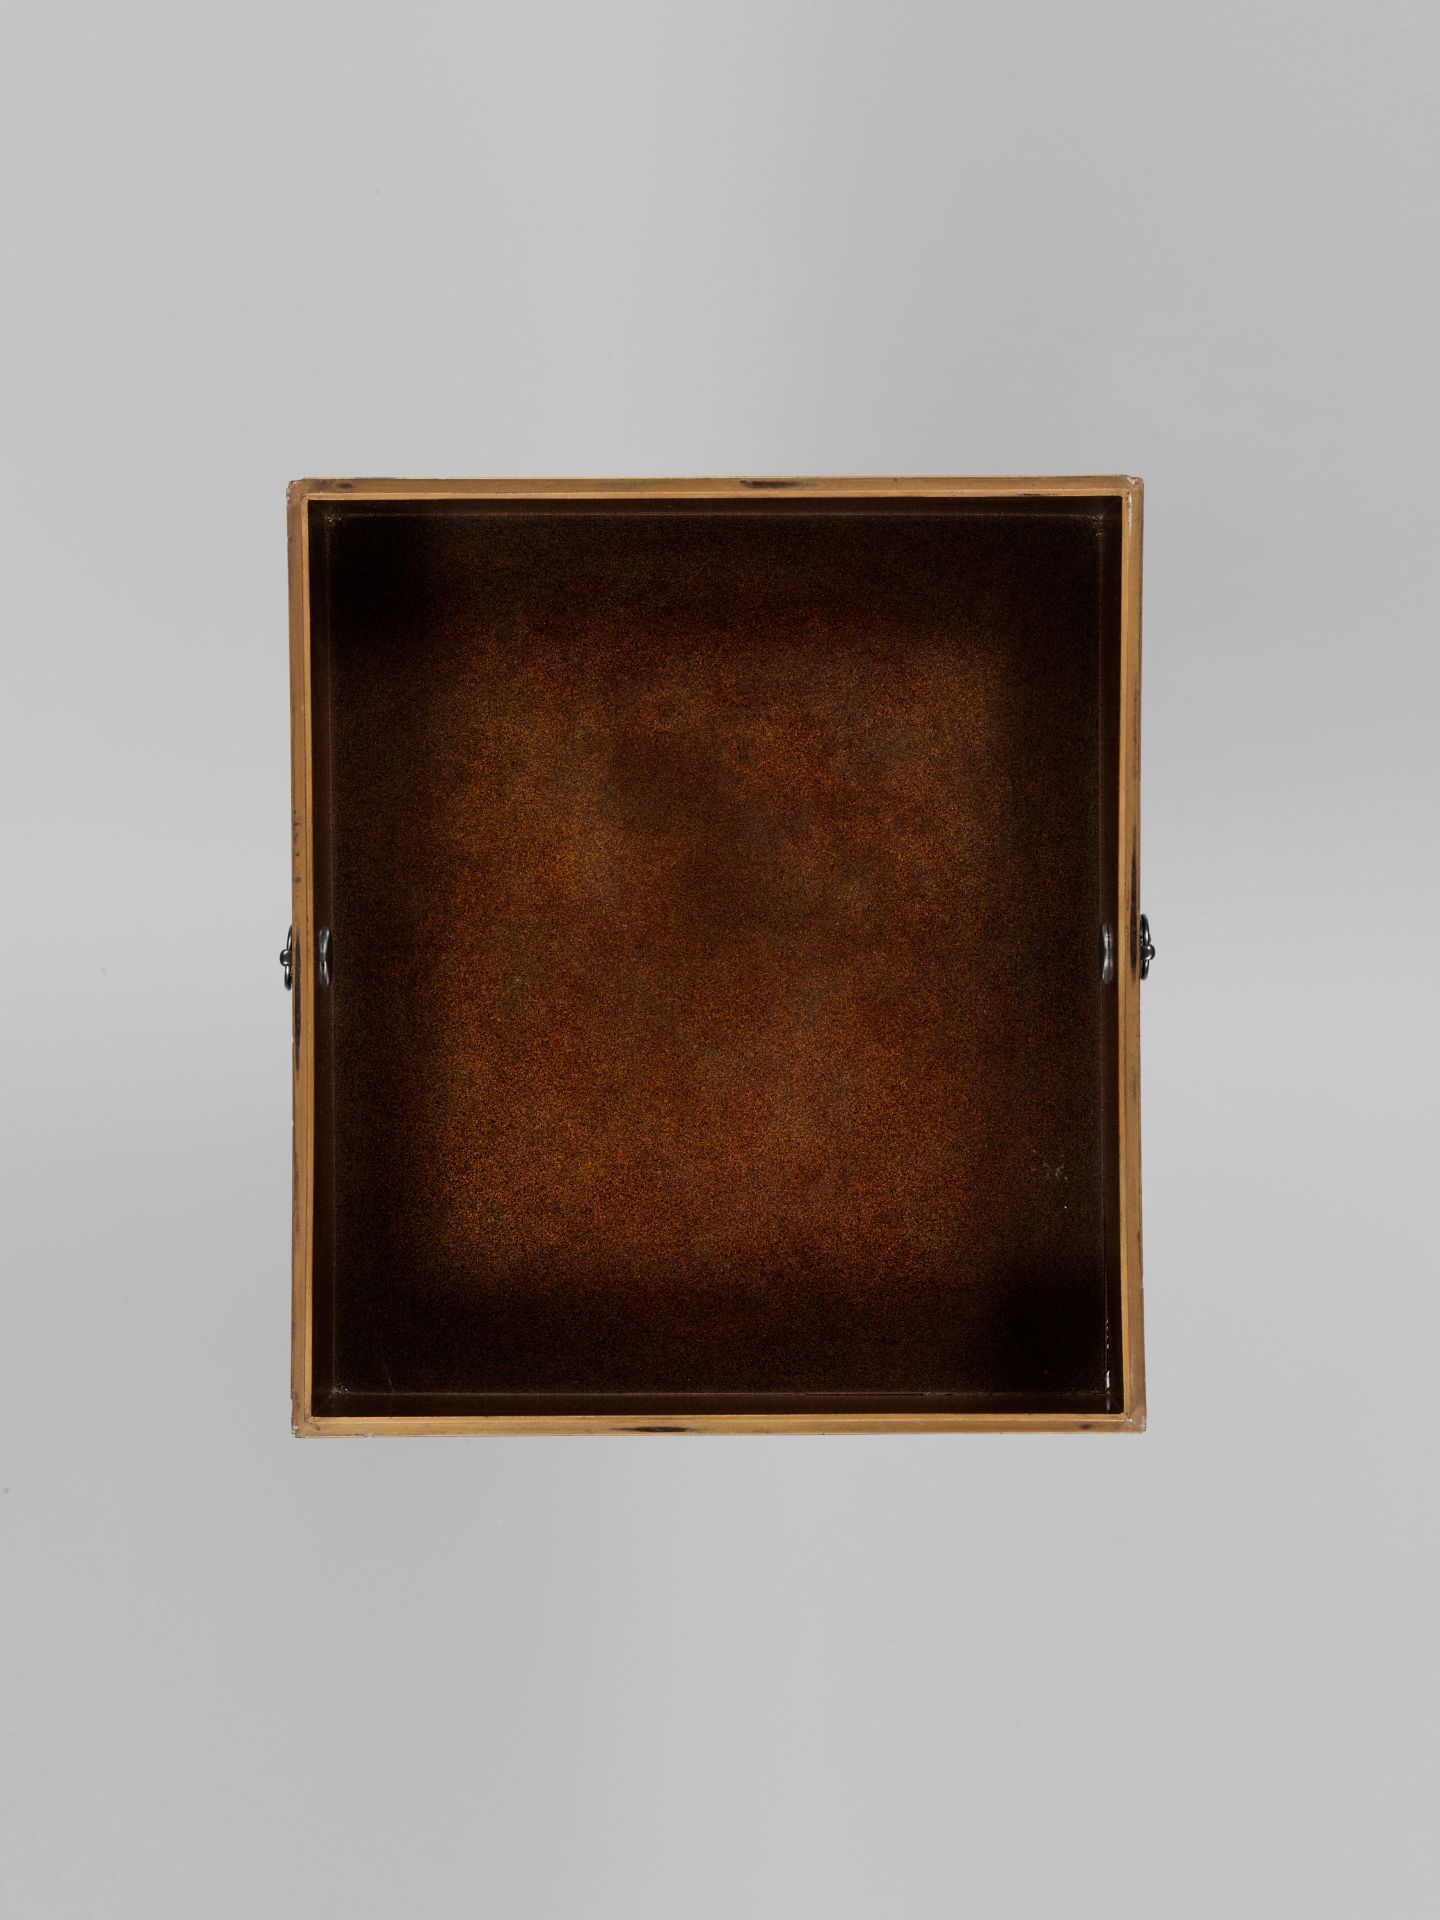 A LACQUER BOX AND COVER WITH MINOGAME DESIGN - Image 6 of 10